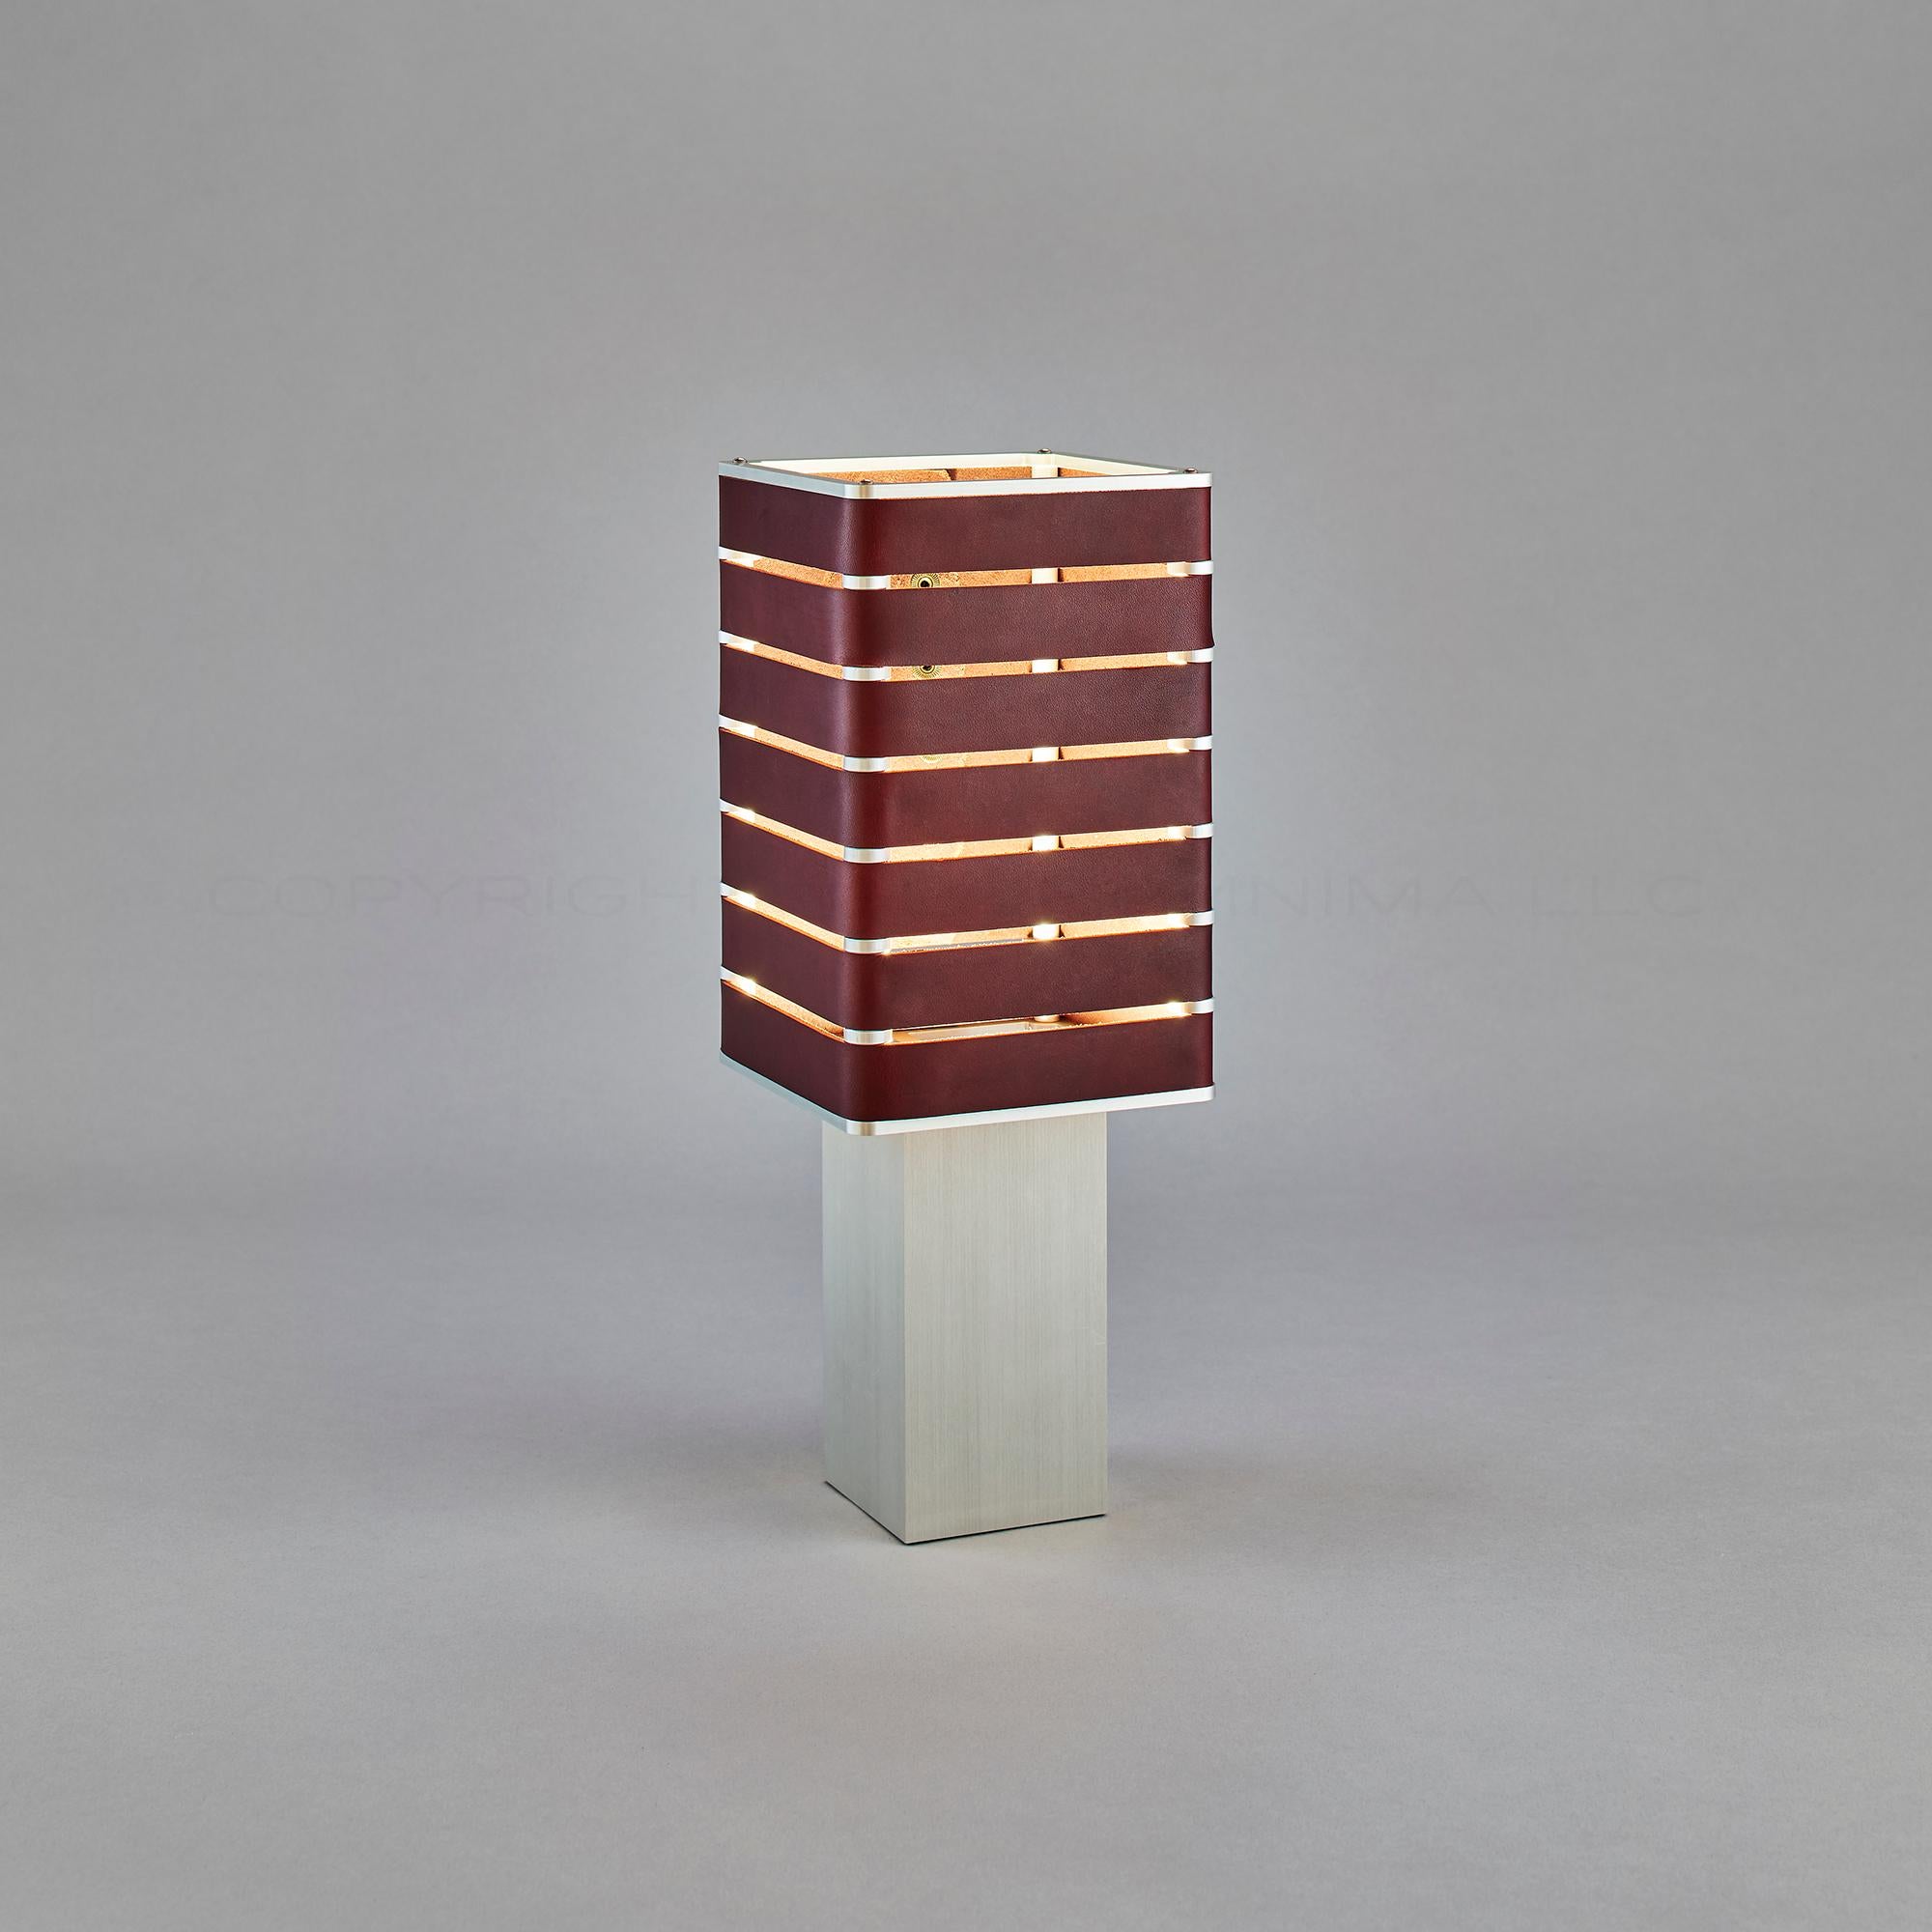 Machine-Made Modern, Minimal, Solid Metal Table Light in Siena Brown Italian Leather For Sale